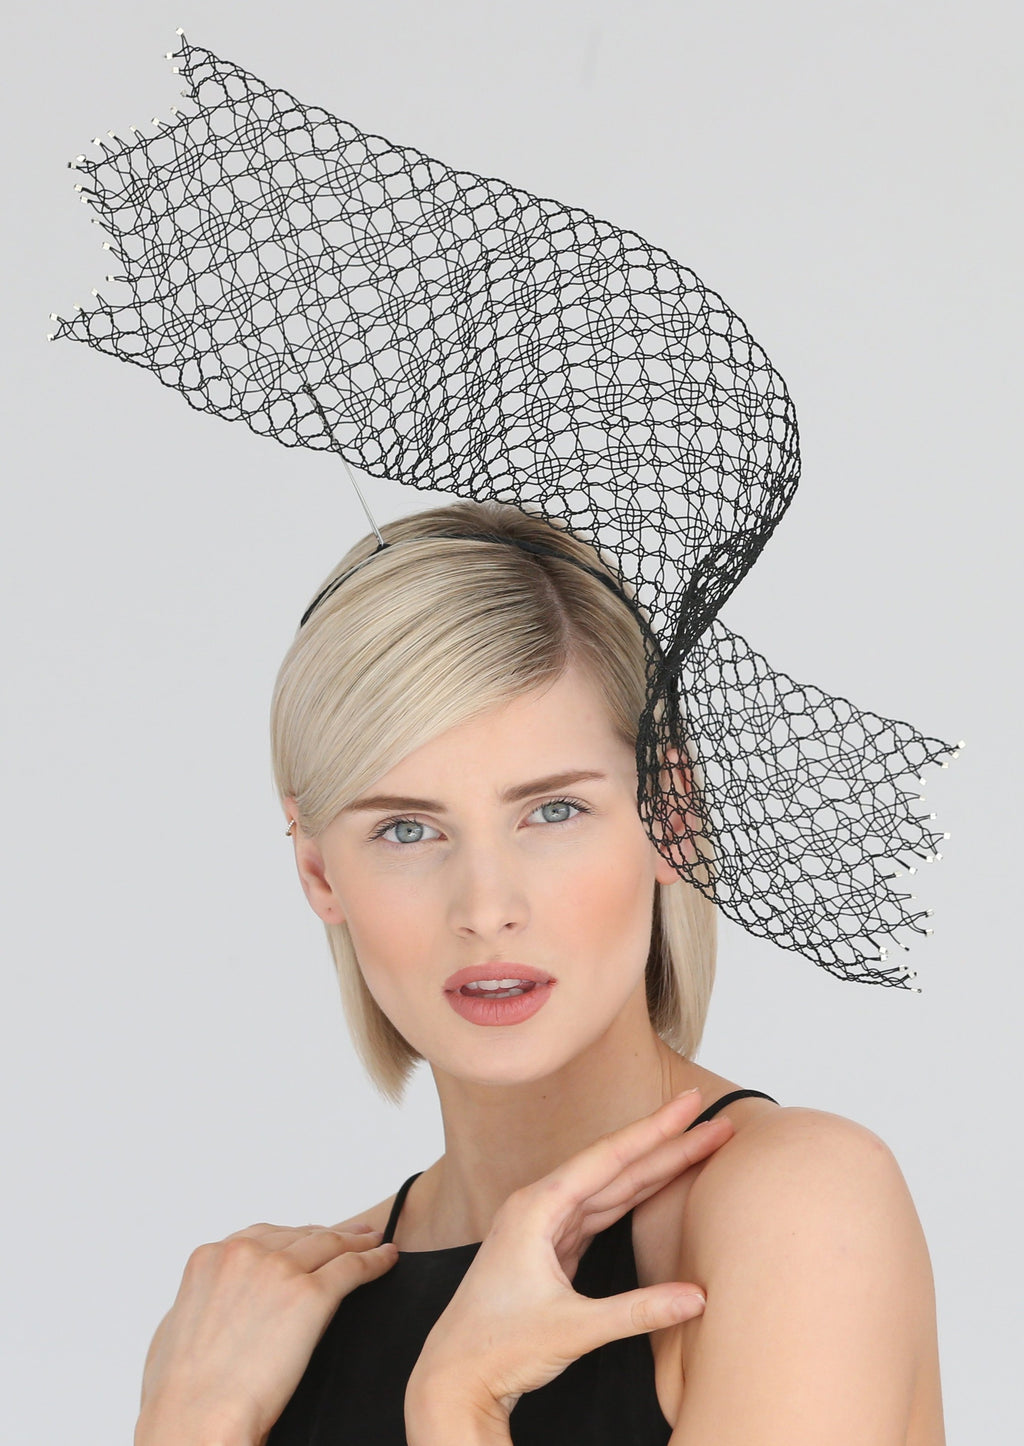 A model with blonde hair wears a black headpiece on her left hand side. It is formed of a wide rectangular piece of mesh-like wire lace in a pattern reminiscent of stars. The mesh is see-through. The ends are uneven like a zigzag and the wire ends are finished with tiny silver metal plates. The rectangle starts high above her head, curving back where it meets her head above her left ear and then curling outwards again to the side of her face.